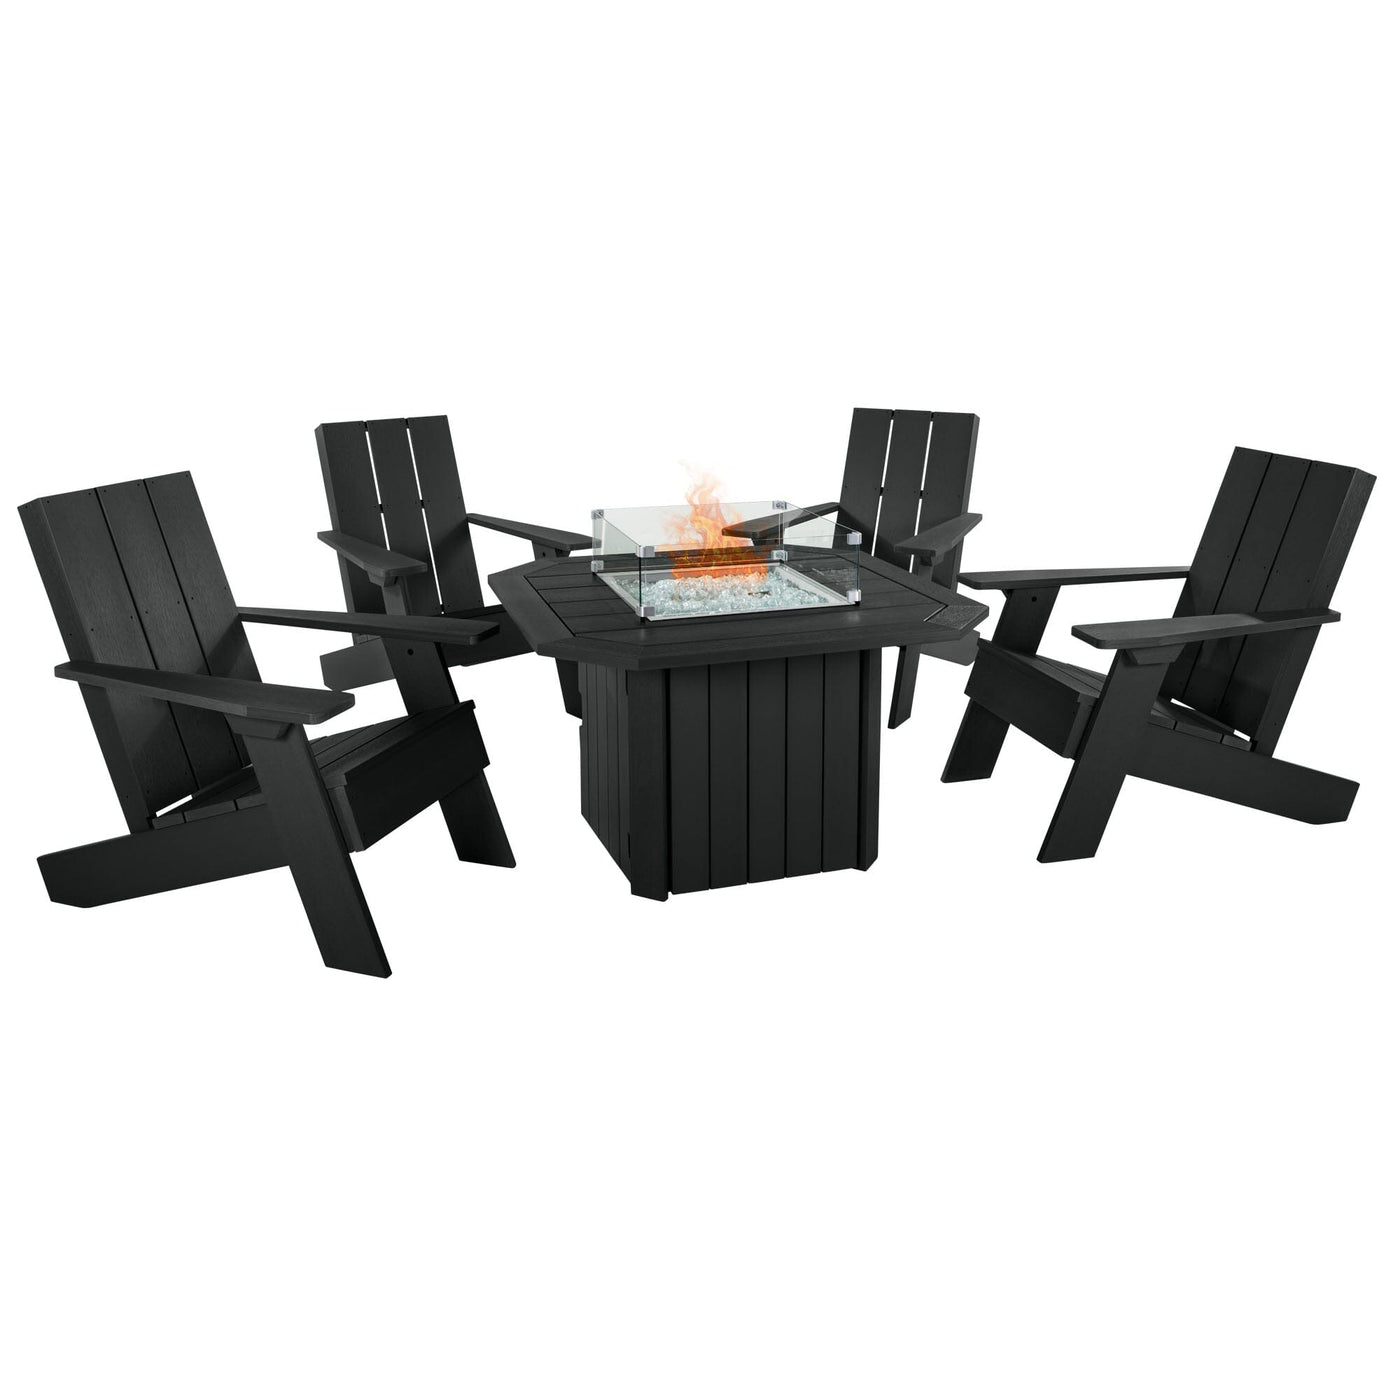 Italica Modern Adirondack 5-Piece Conversation Set with Fire Pit Table Kitted Sets Highwood USA Black 